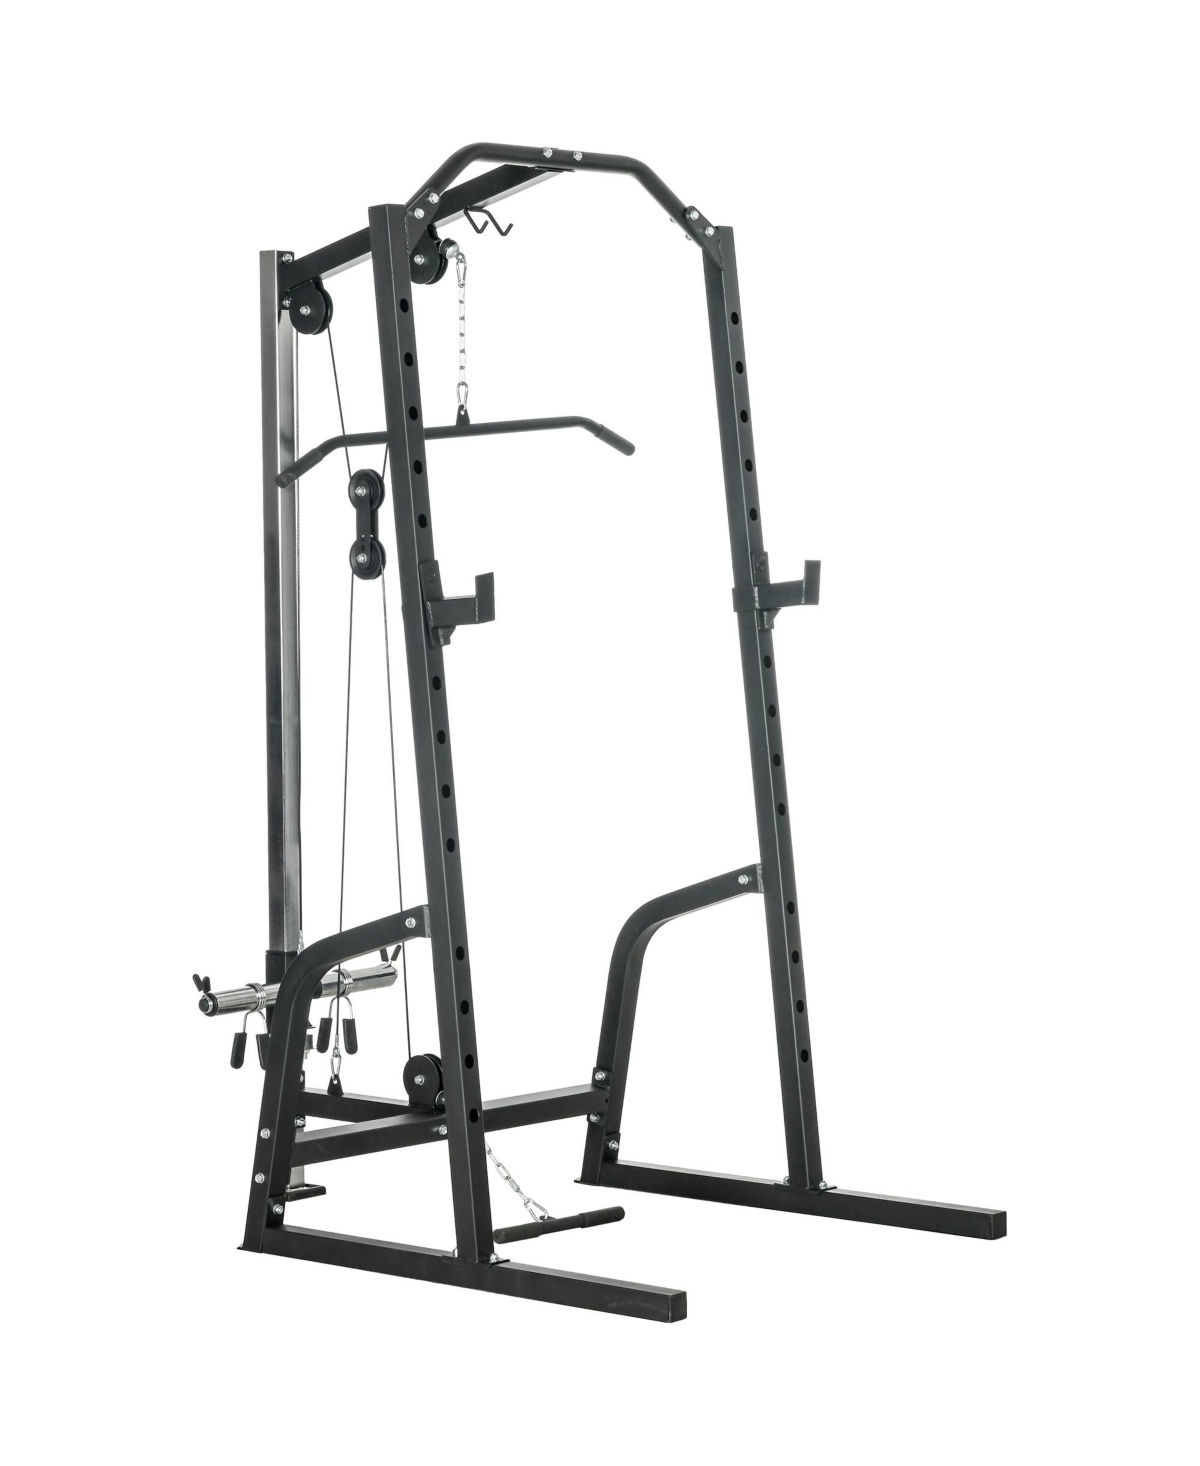 Power Cage with Pulley System, Squat Rack, Pull up / Push up Stand - Black